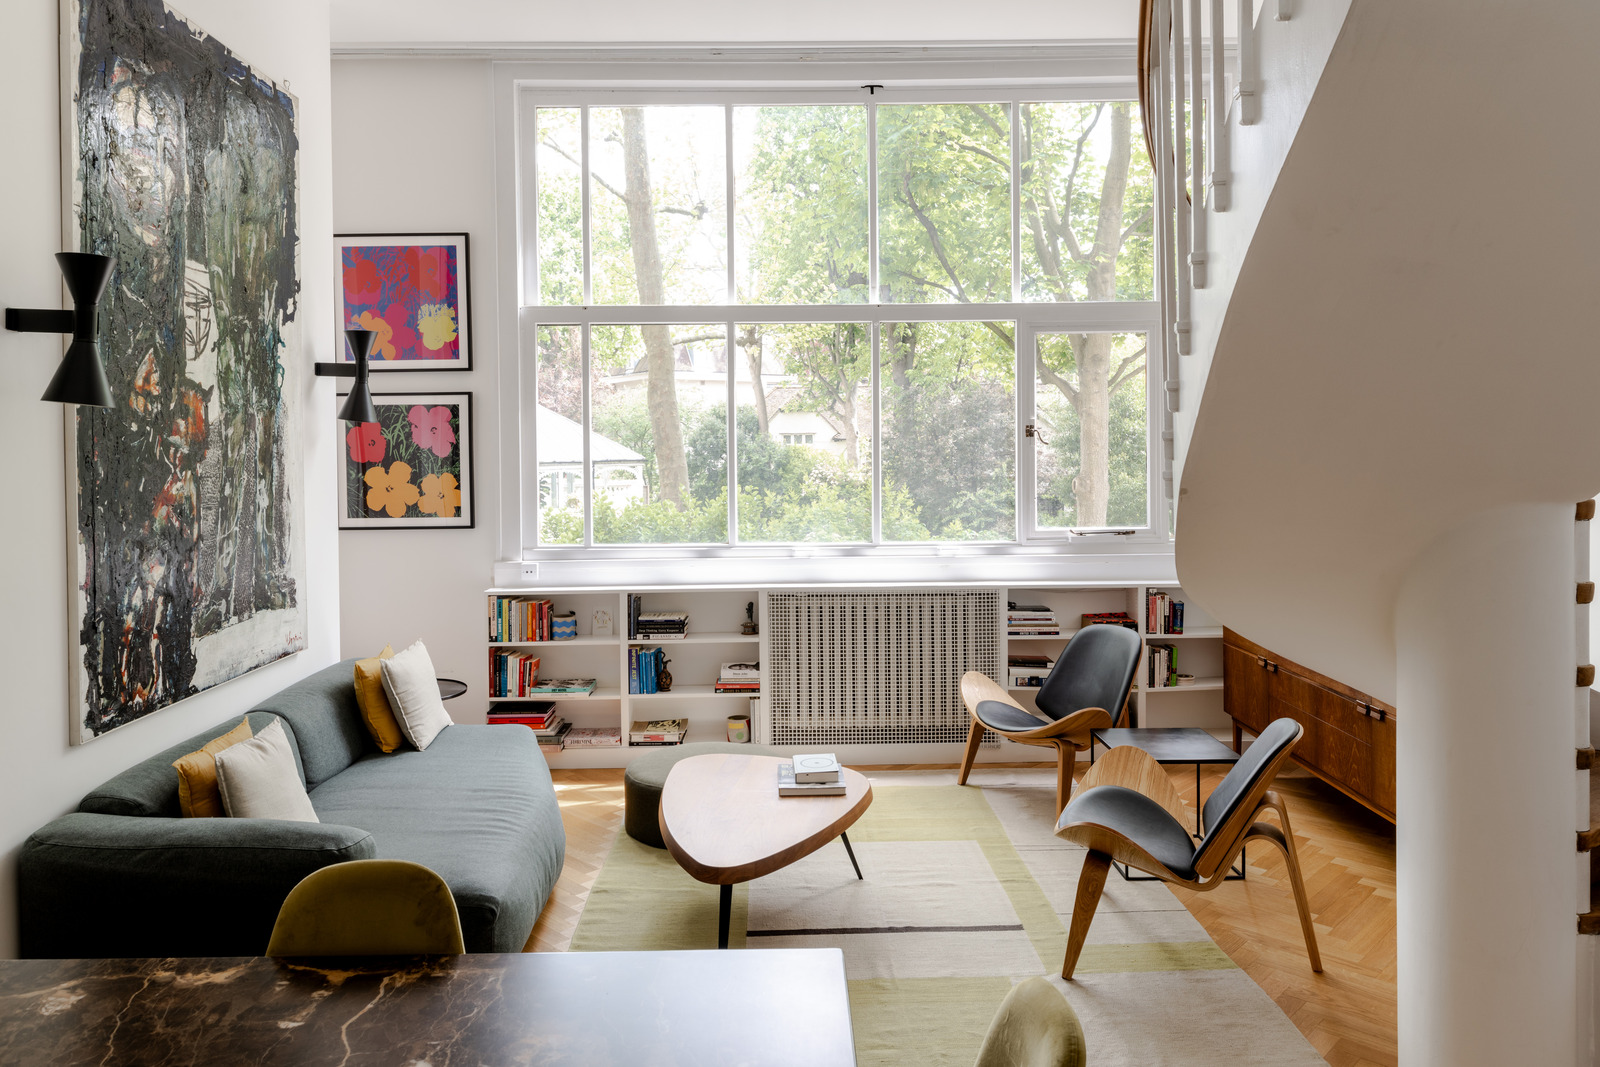 A modernist apartment designed by a famous English architect